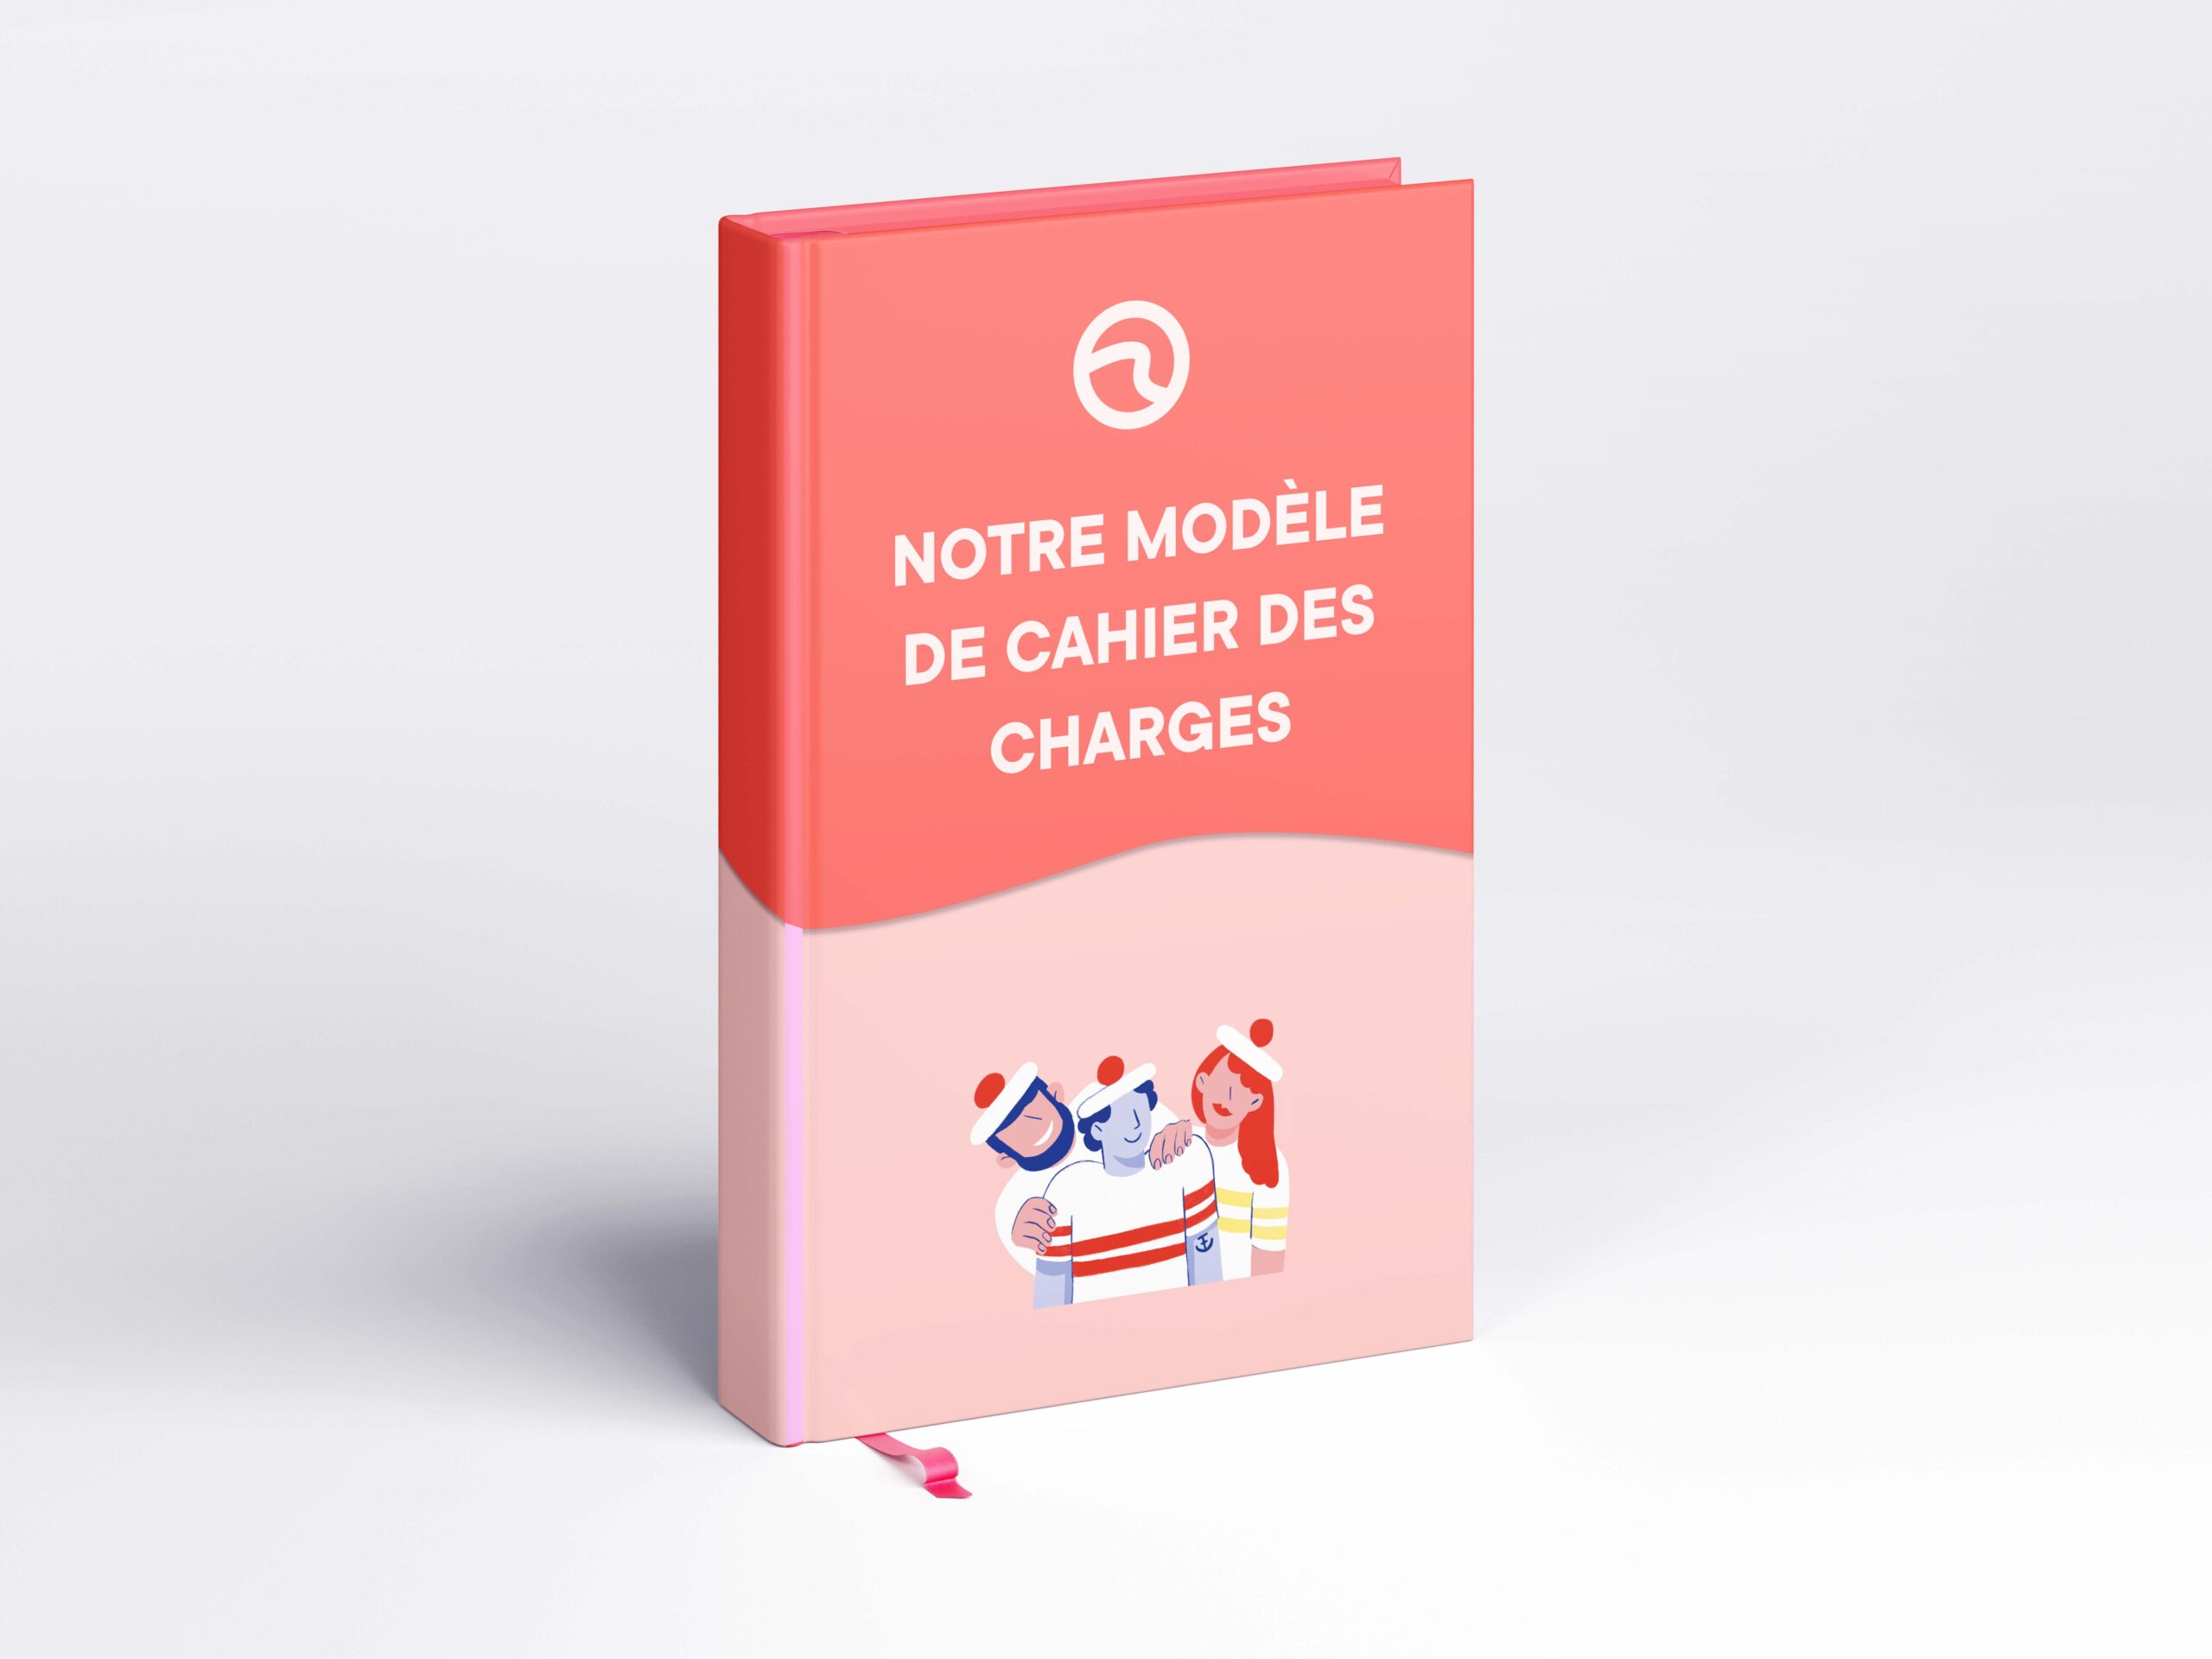 Pilot'in Agence Digitale Template Cahier des charges